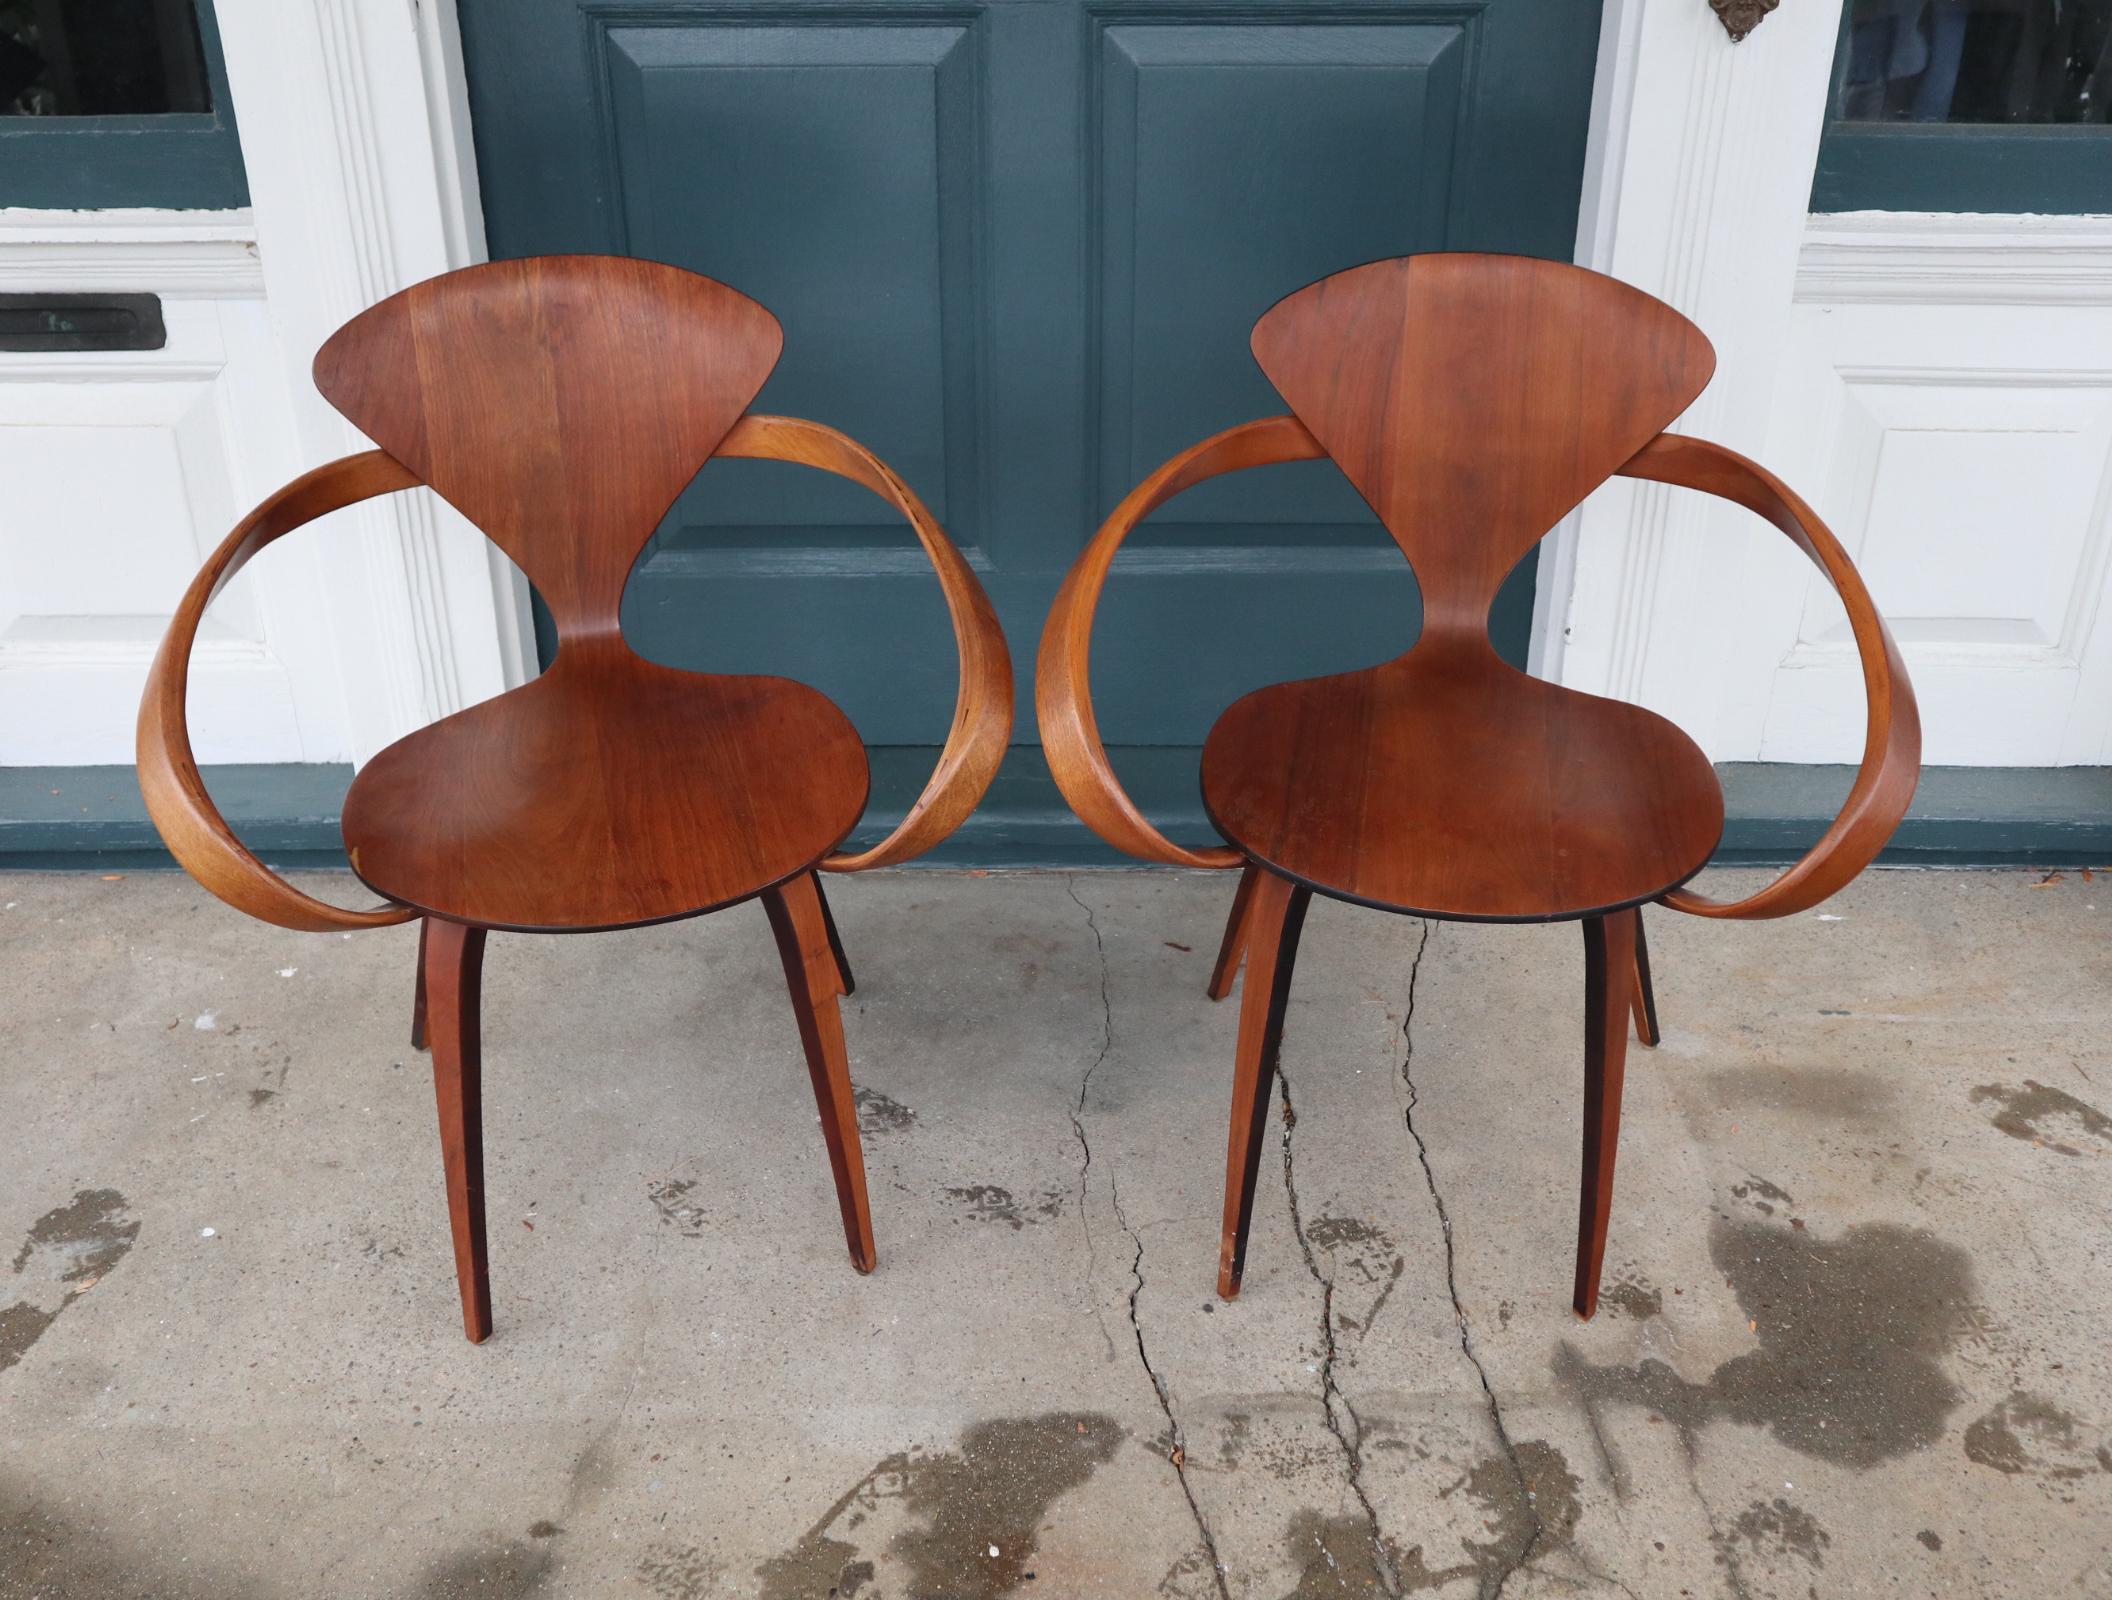 Gorgeous pair of Pretzel arm chairs designed by Norman Cherner and manufactured by Plycraft. Sculptural best wood arms and walnut seat show lovely color and form. One of the finest American chair designs of the 20th century. No breaks at the right